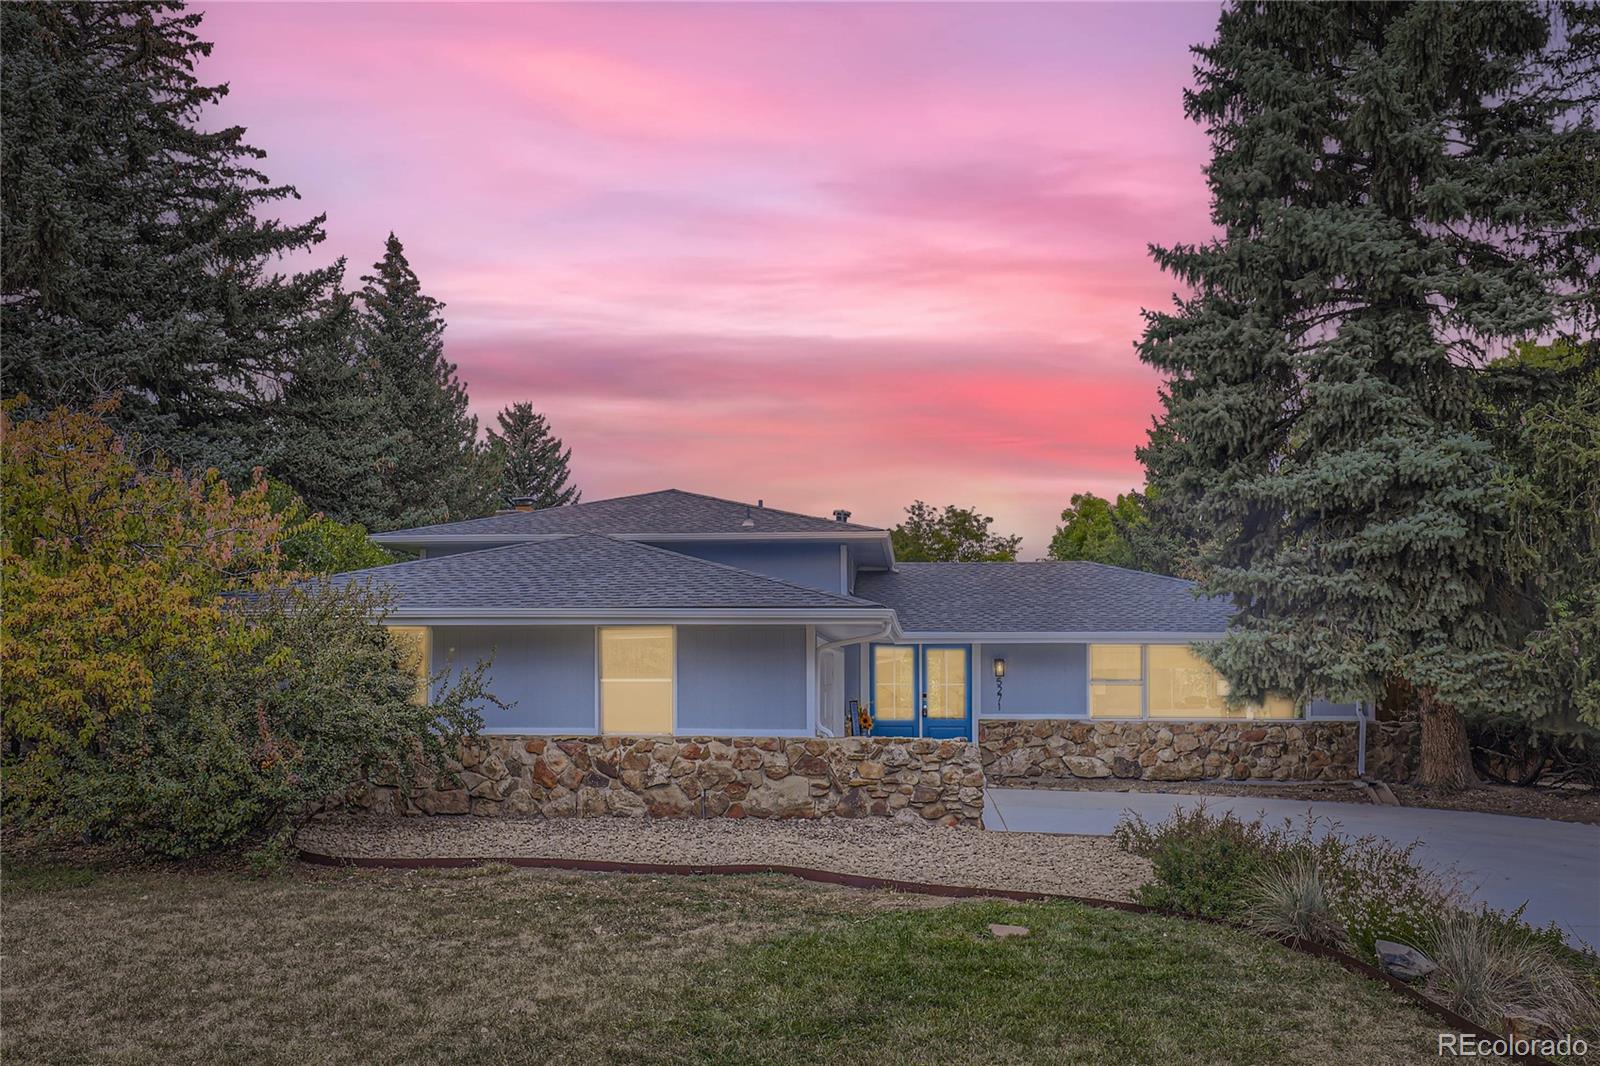 5271  spotted horse trail trail, boulder sold home. Closed on 2024-02-06 for $925,000.